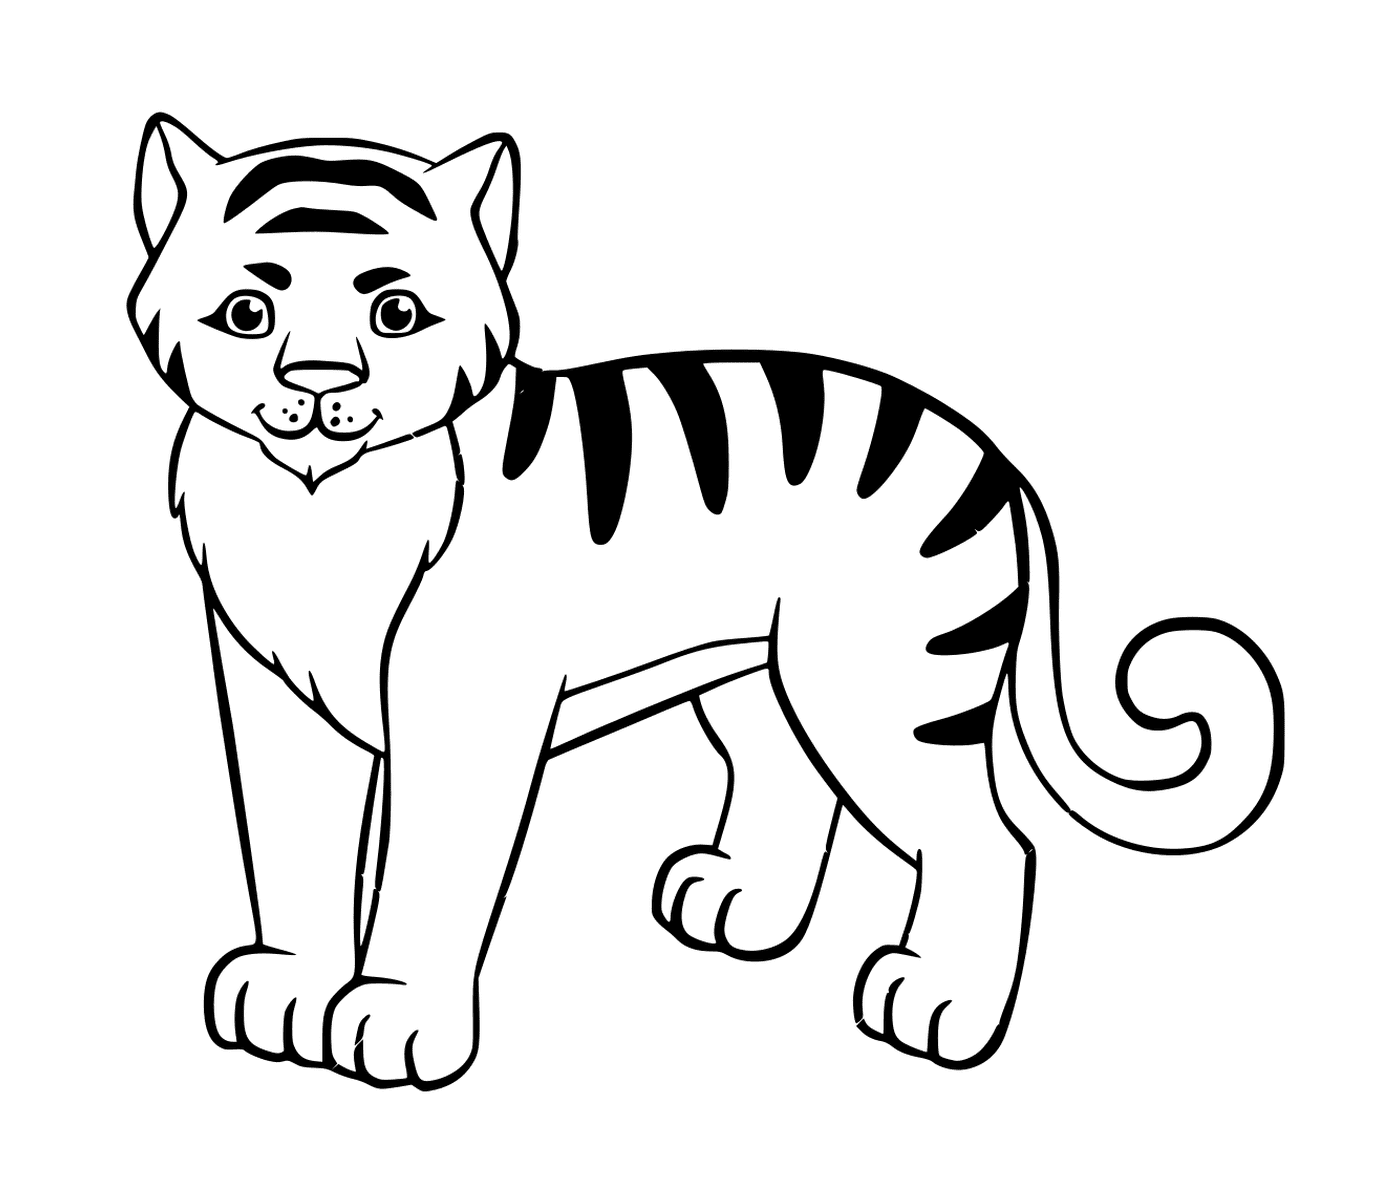  A tiger with black stripes 